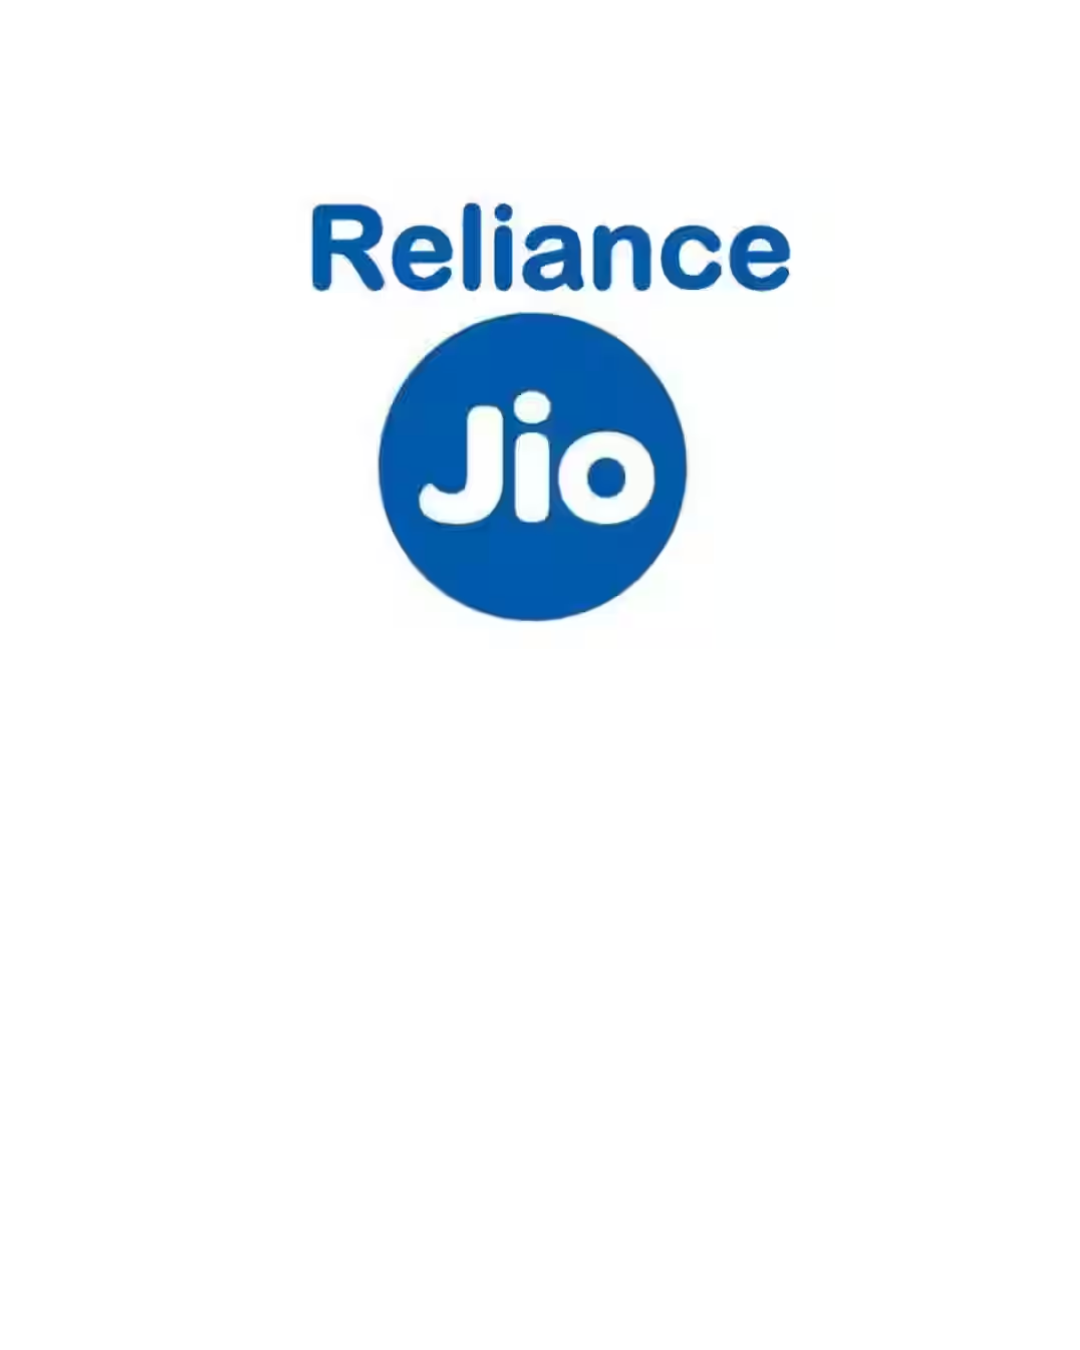 Reliance Jio Q1 Results: Firm's net profits up by 12% to Rs 4,963 cr